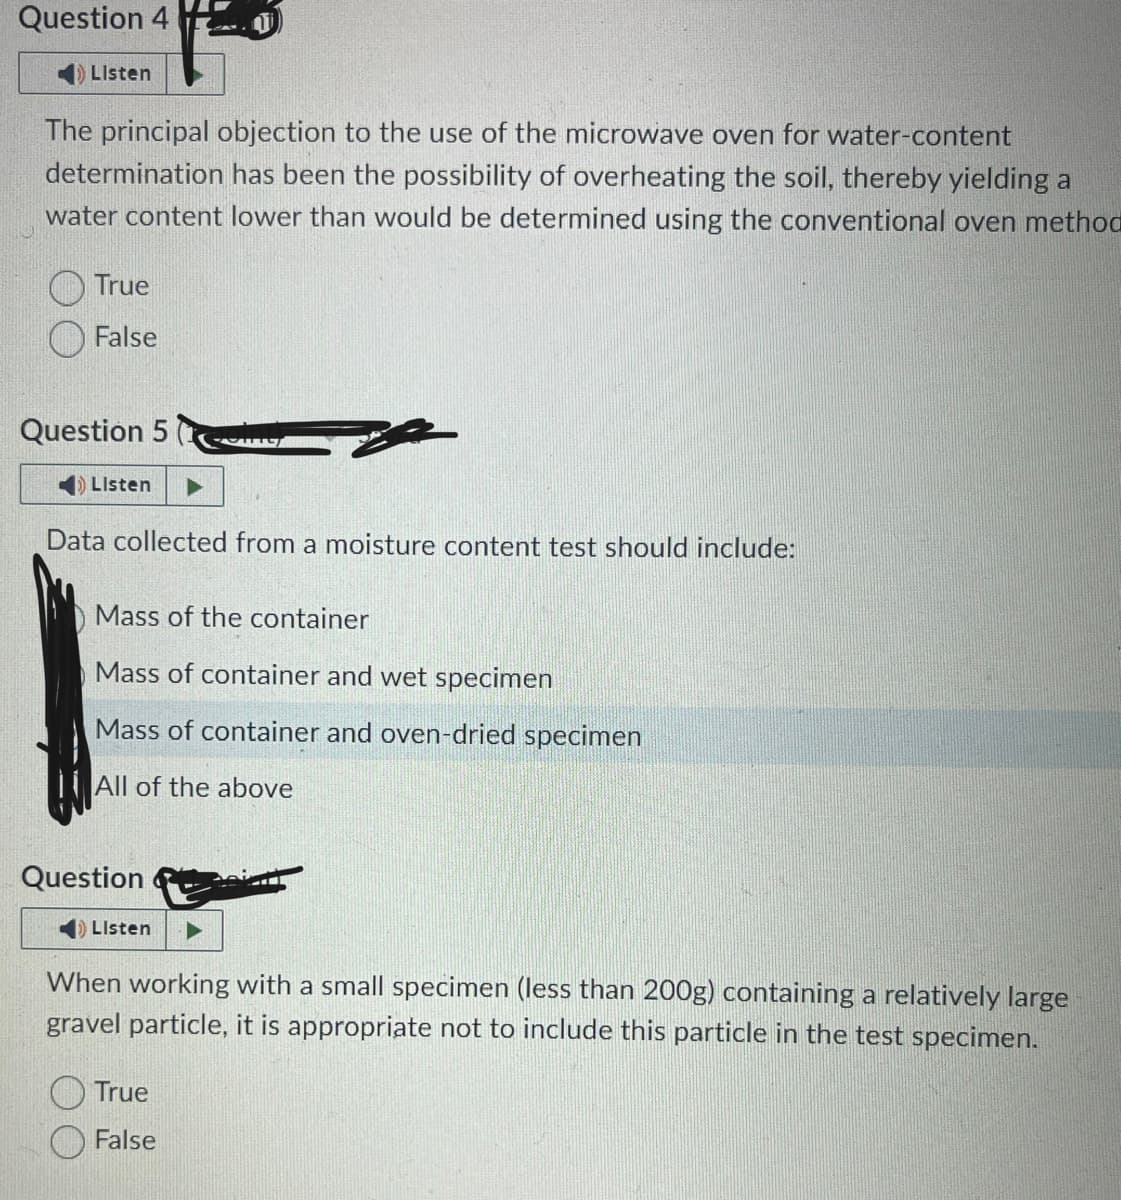 Question 4
Listen
The principal objection to the use of the microwave oven for water-content
determination has been the possibility of overheating the soil, thereby yielding a
water content lower than would be determined using the conventional oven method
True
False
Question 5
Listen
Data collected from a moisture content test should include:
Mass of the container
Mass of container and wet specimen
Mass of container and oven-dried specimen
All of the above
Question
Om
Listen
When working with a small specimen (less than 200g) containing a relatively large
gravel particle, it is appropriate not to include this particle in the test specimen.
True
False